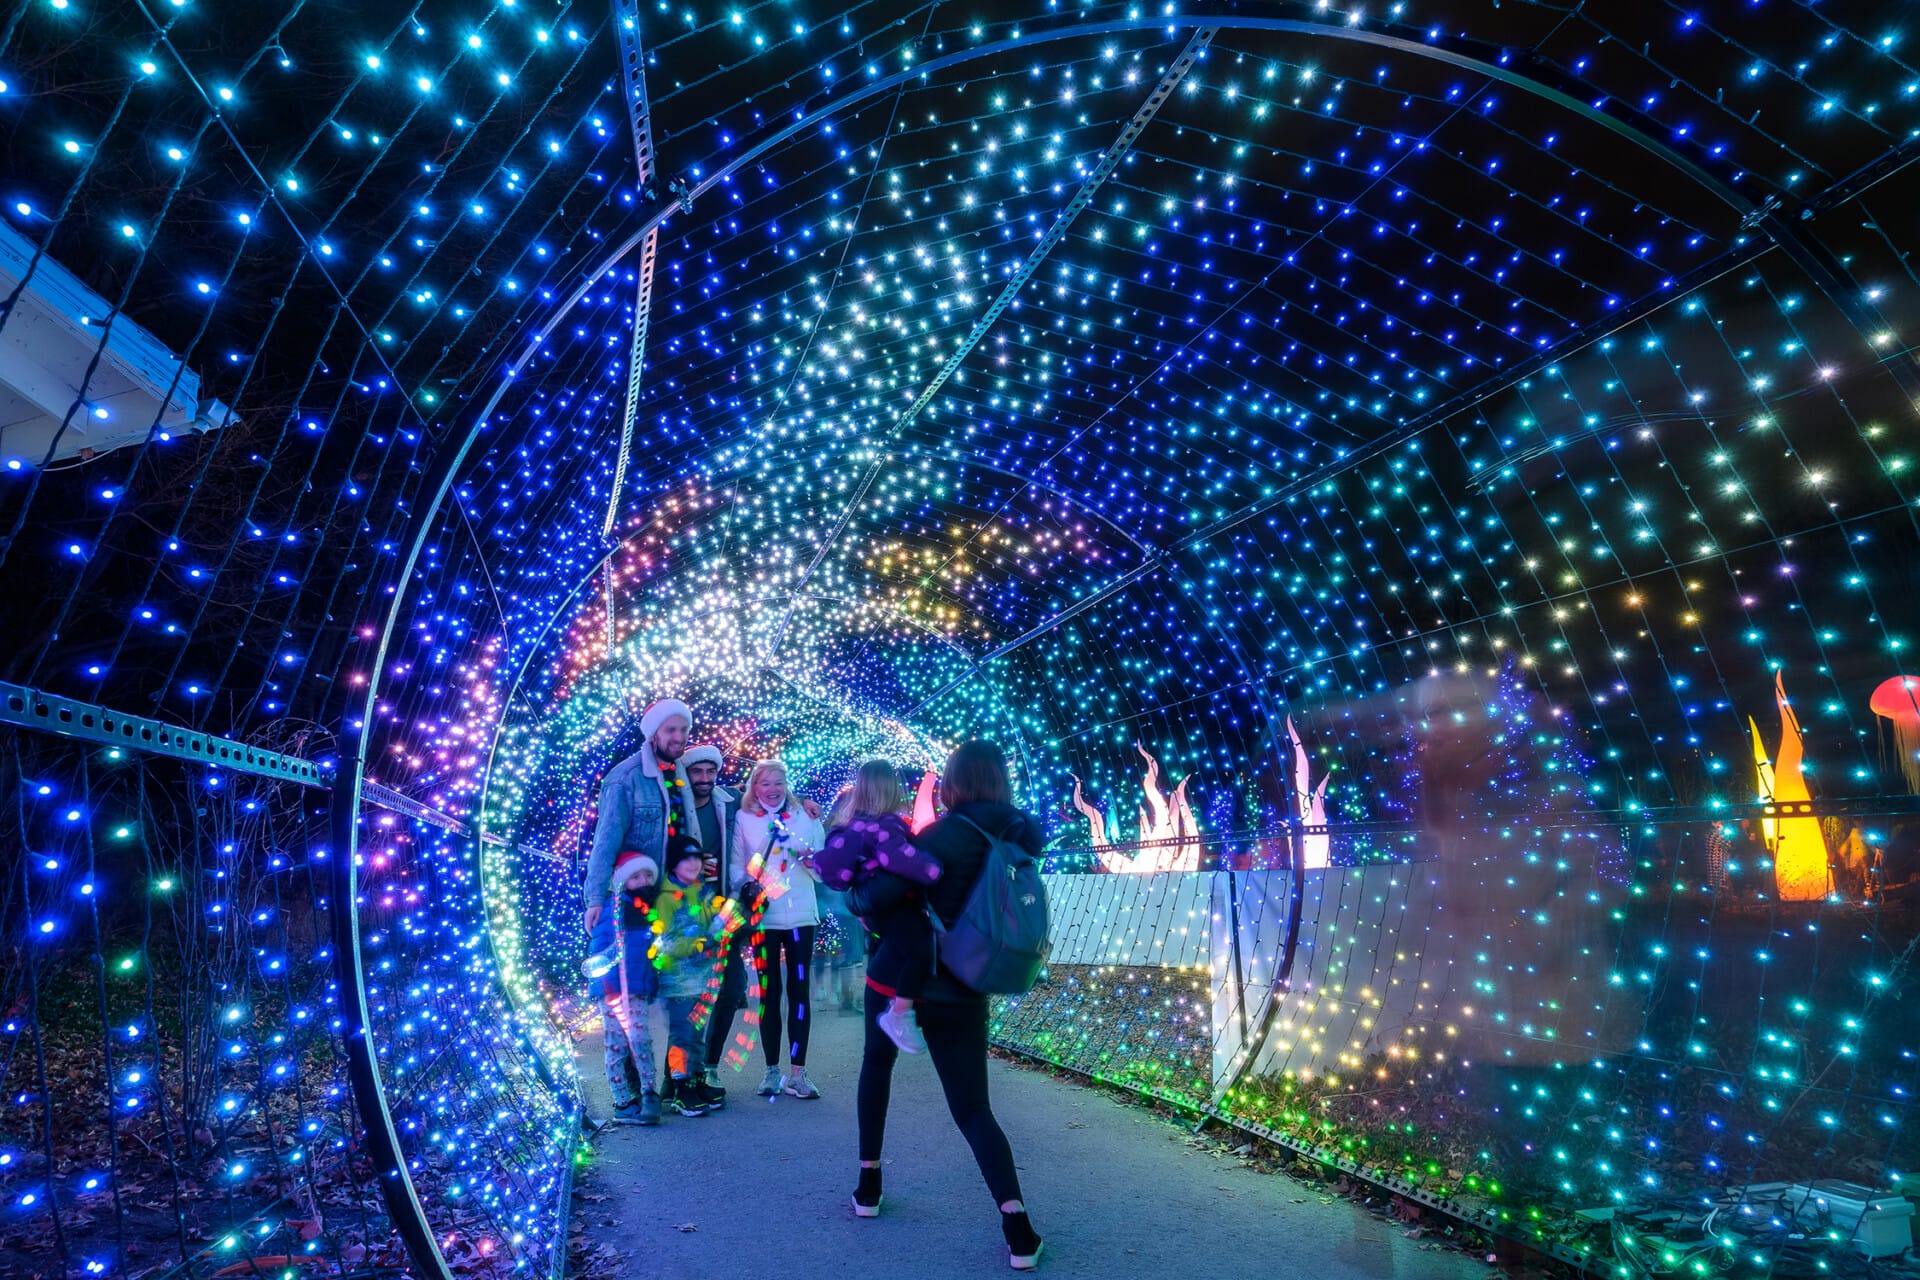 LumiNature Presented by Chase Glimmers Again at Philadelphia Zoo